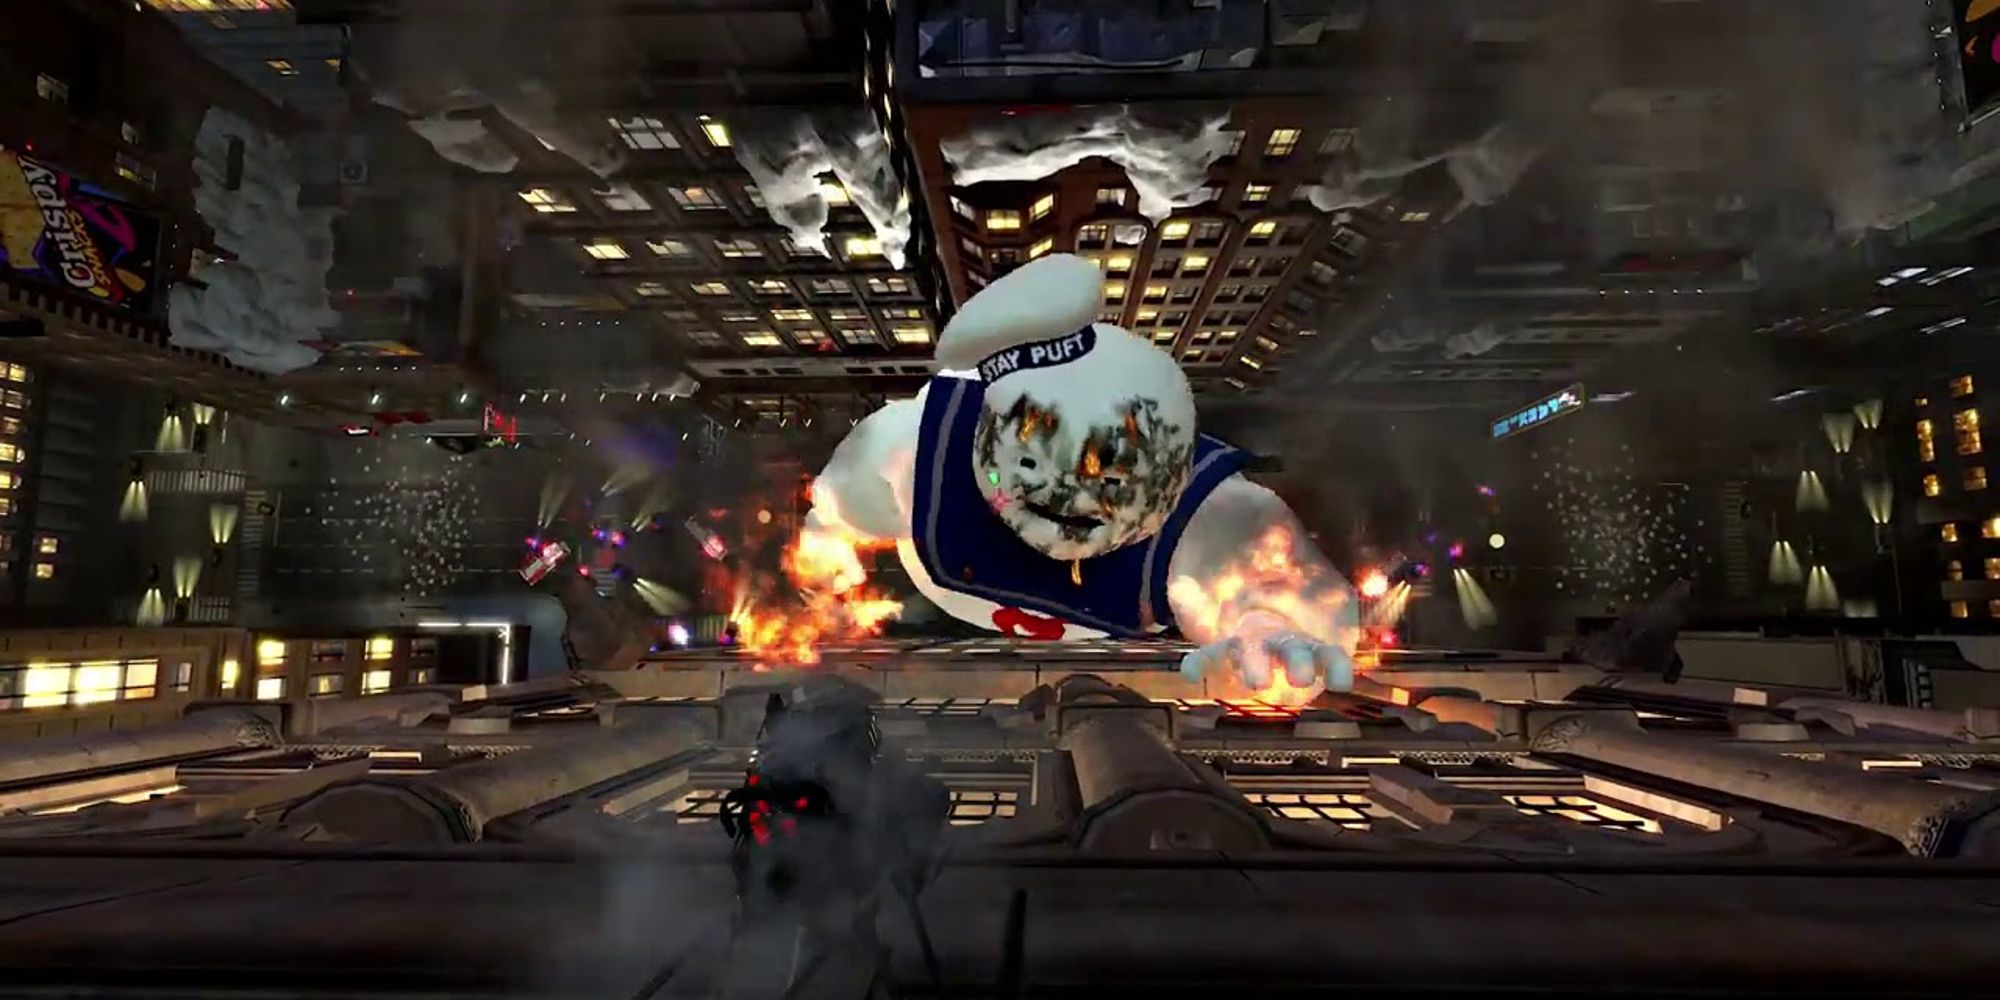 Ghostbusters The Video Game 2009 Gameplay Screenshot